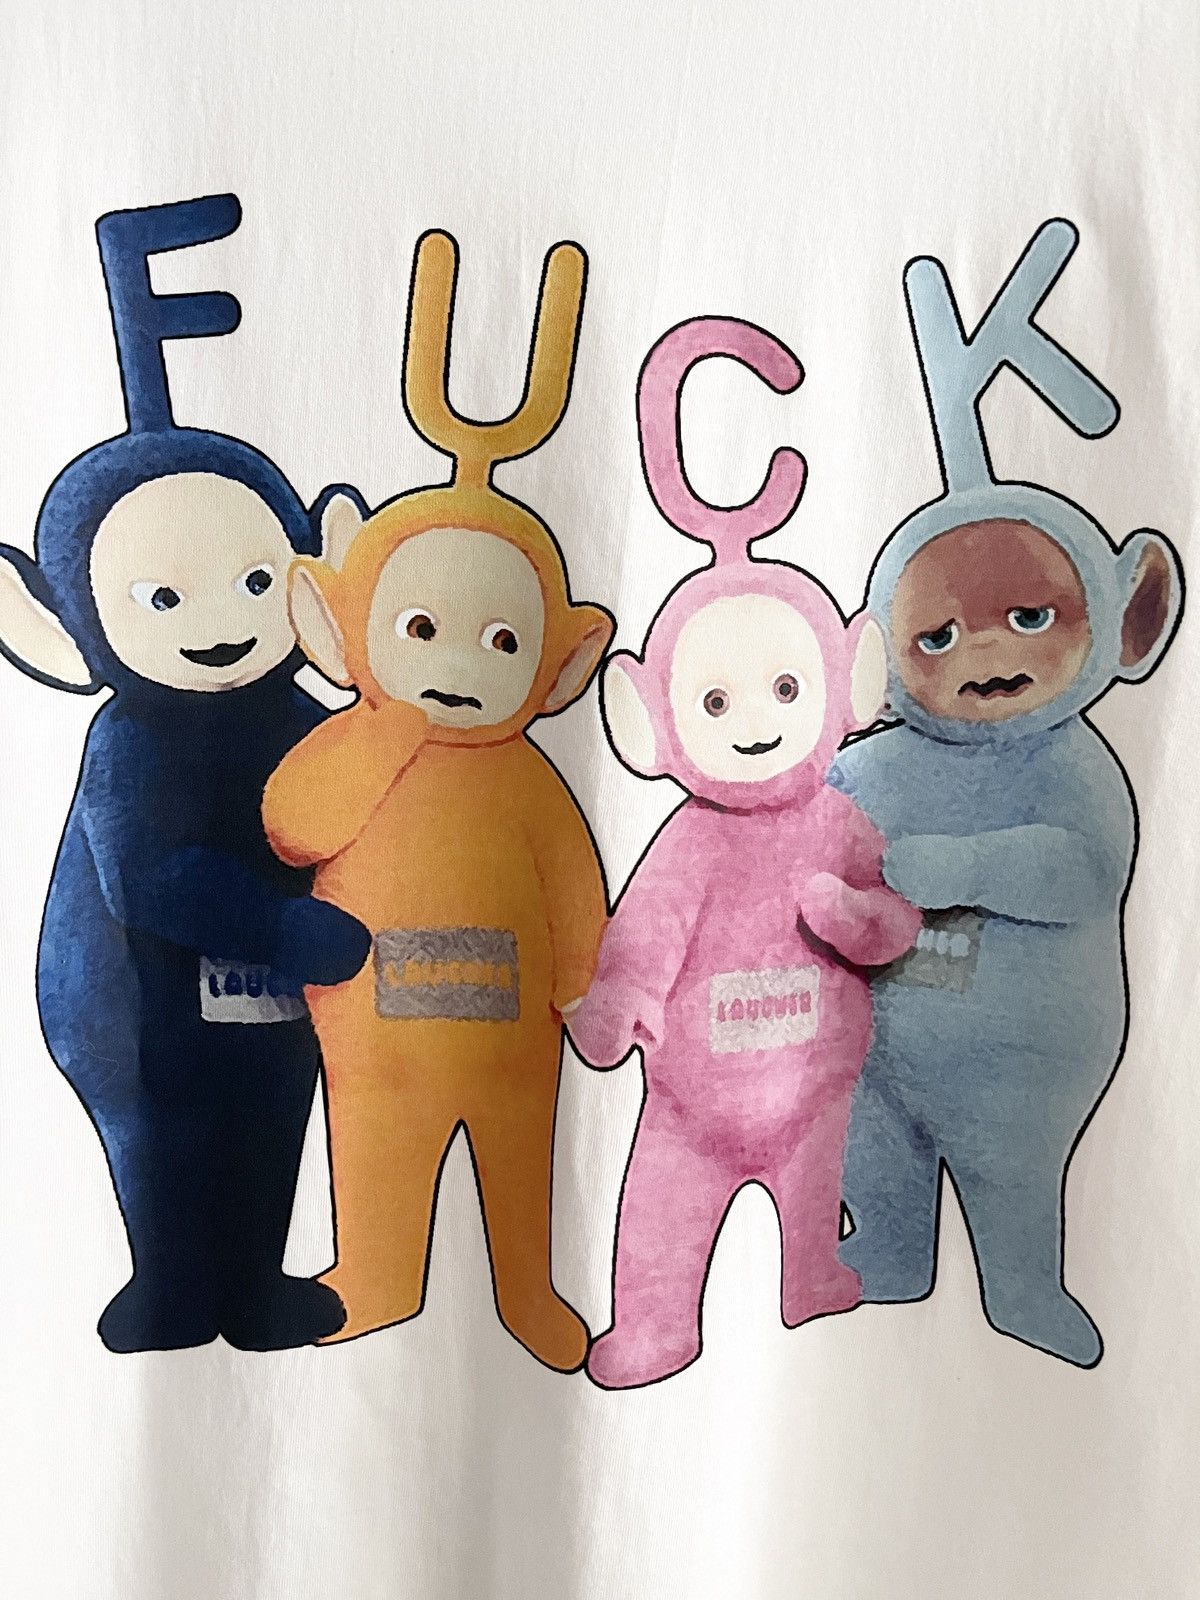 Humor - STEAL! 2000s Teletubbies FUCK Family Characters Tee (L) - 4